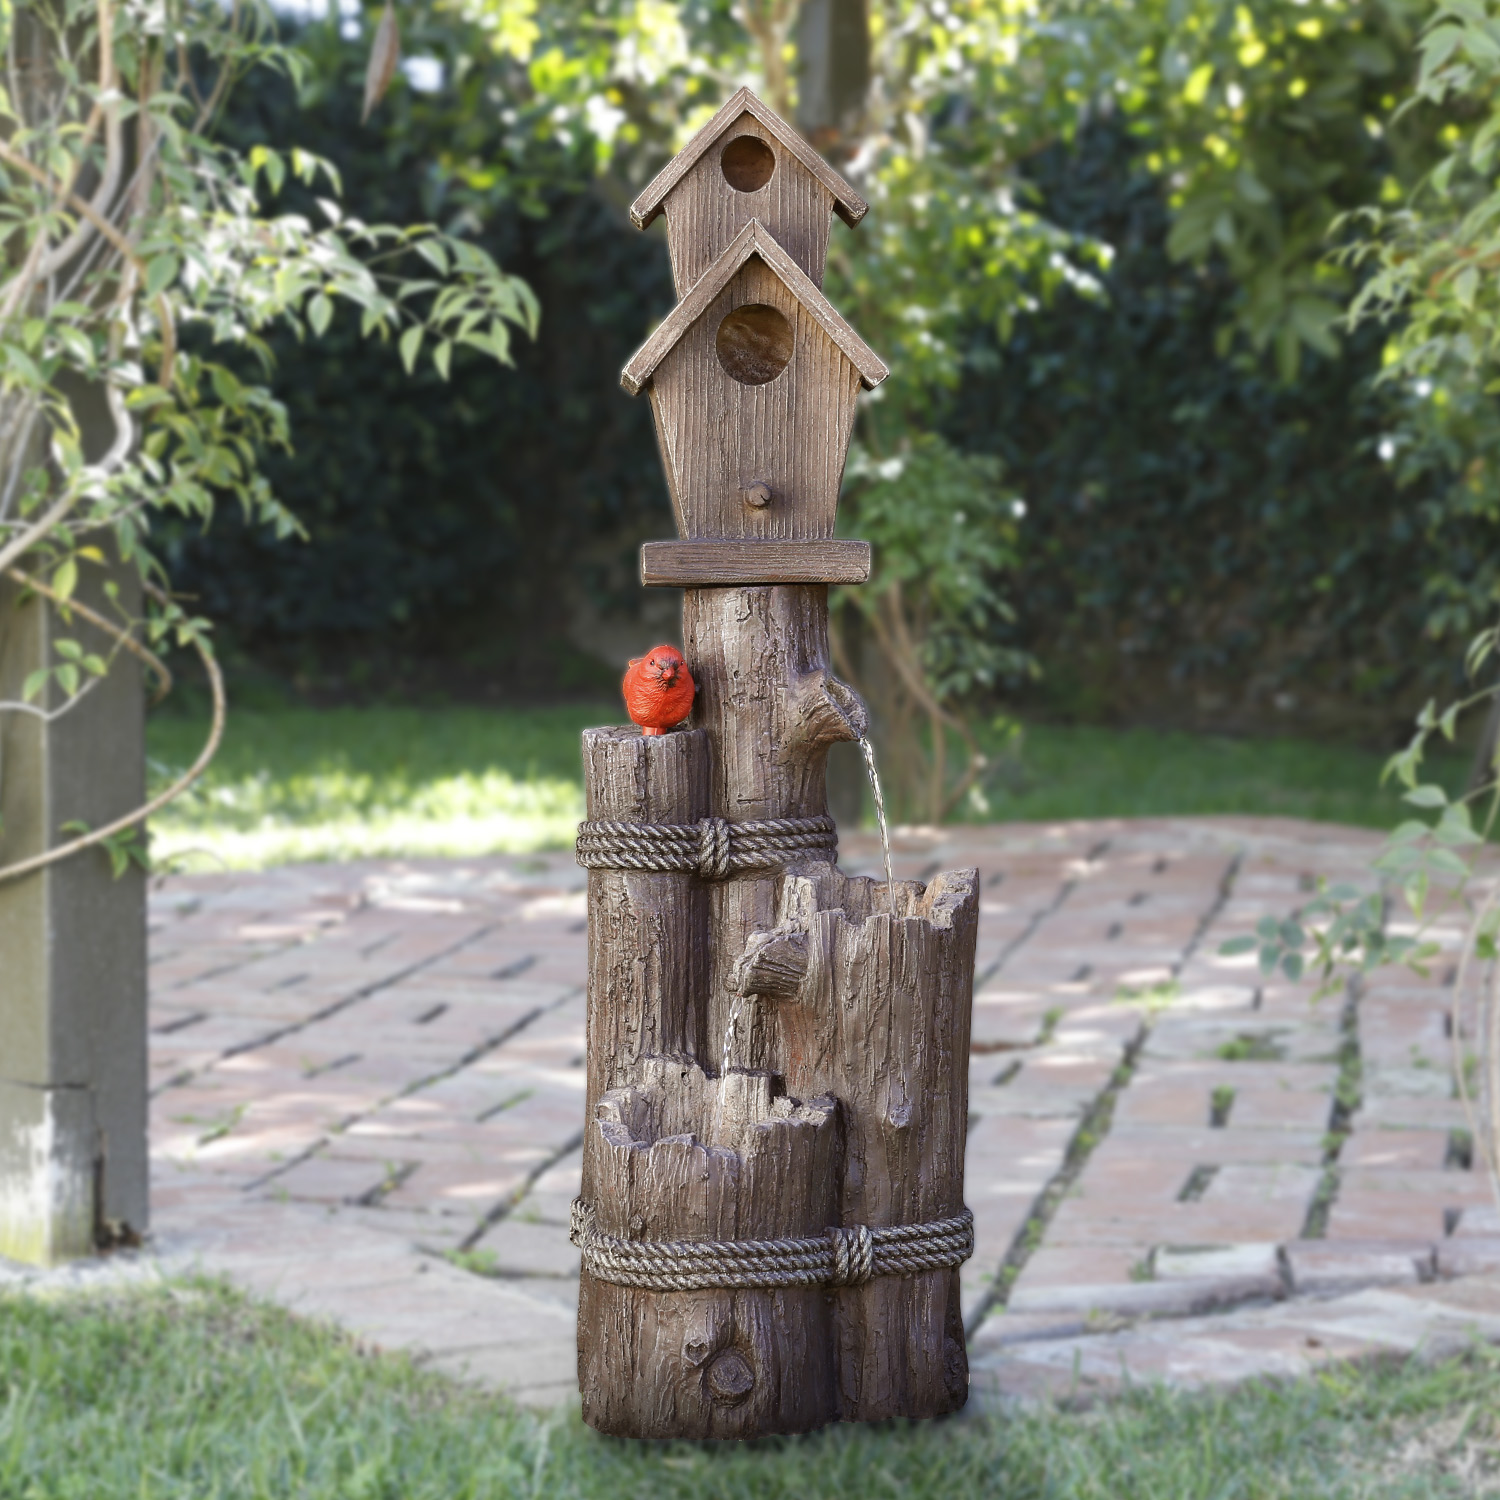 Alpine Corporation 35-Inch Fountain and Birdhouse with Cardinal Figurine - image 1 of 12